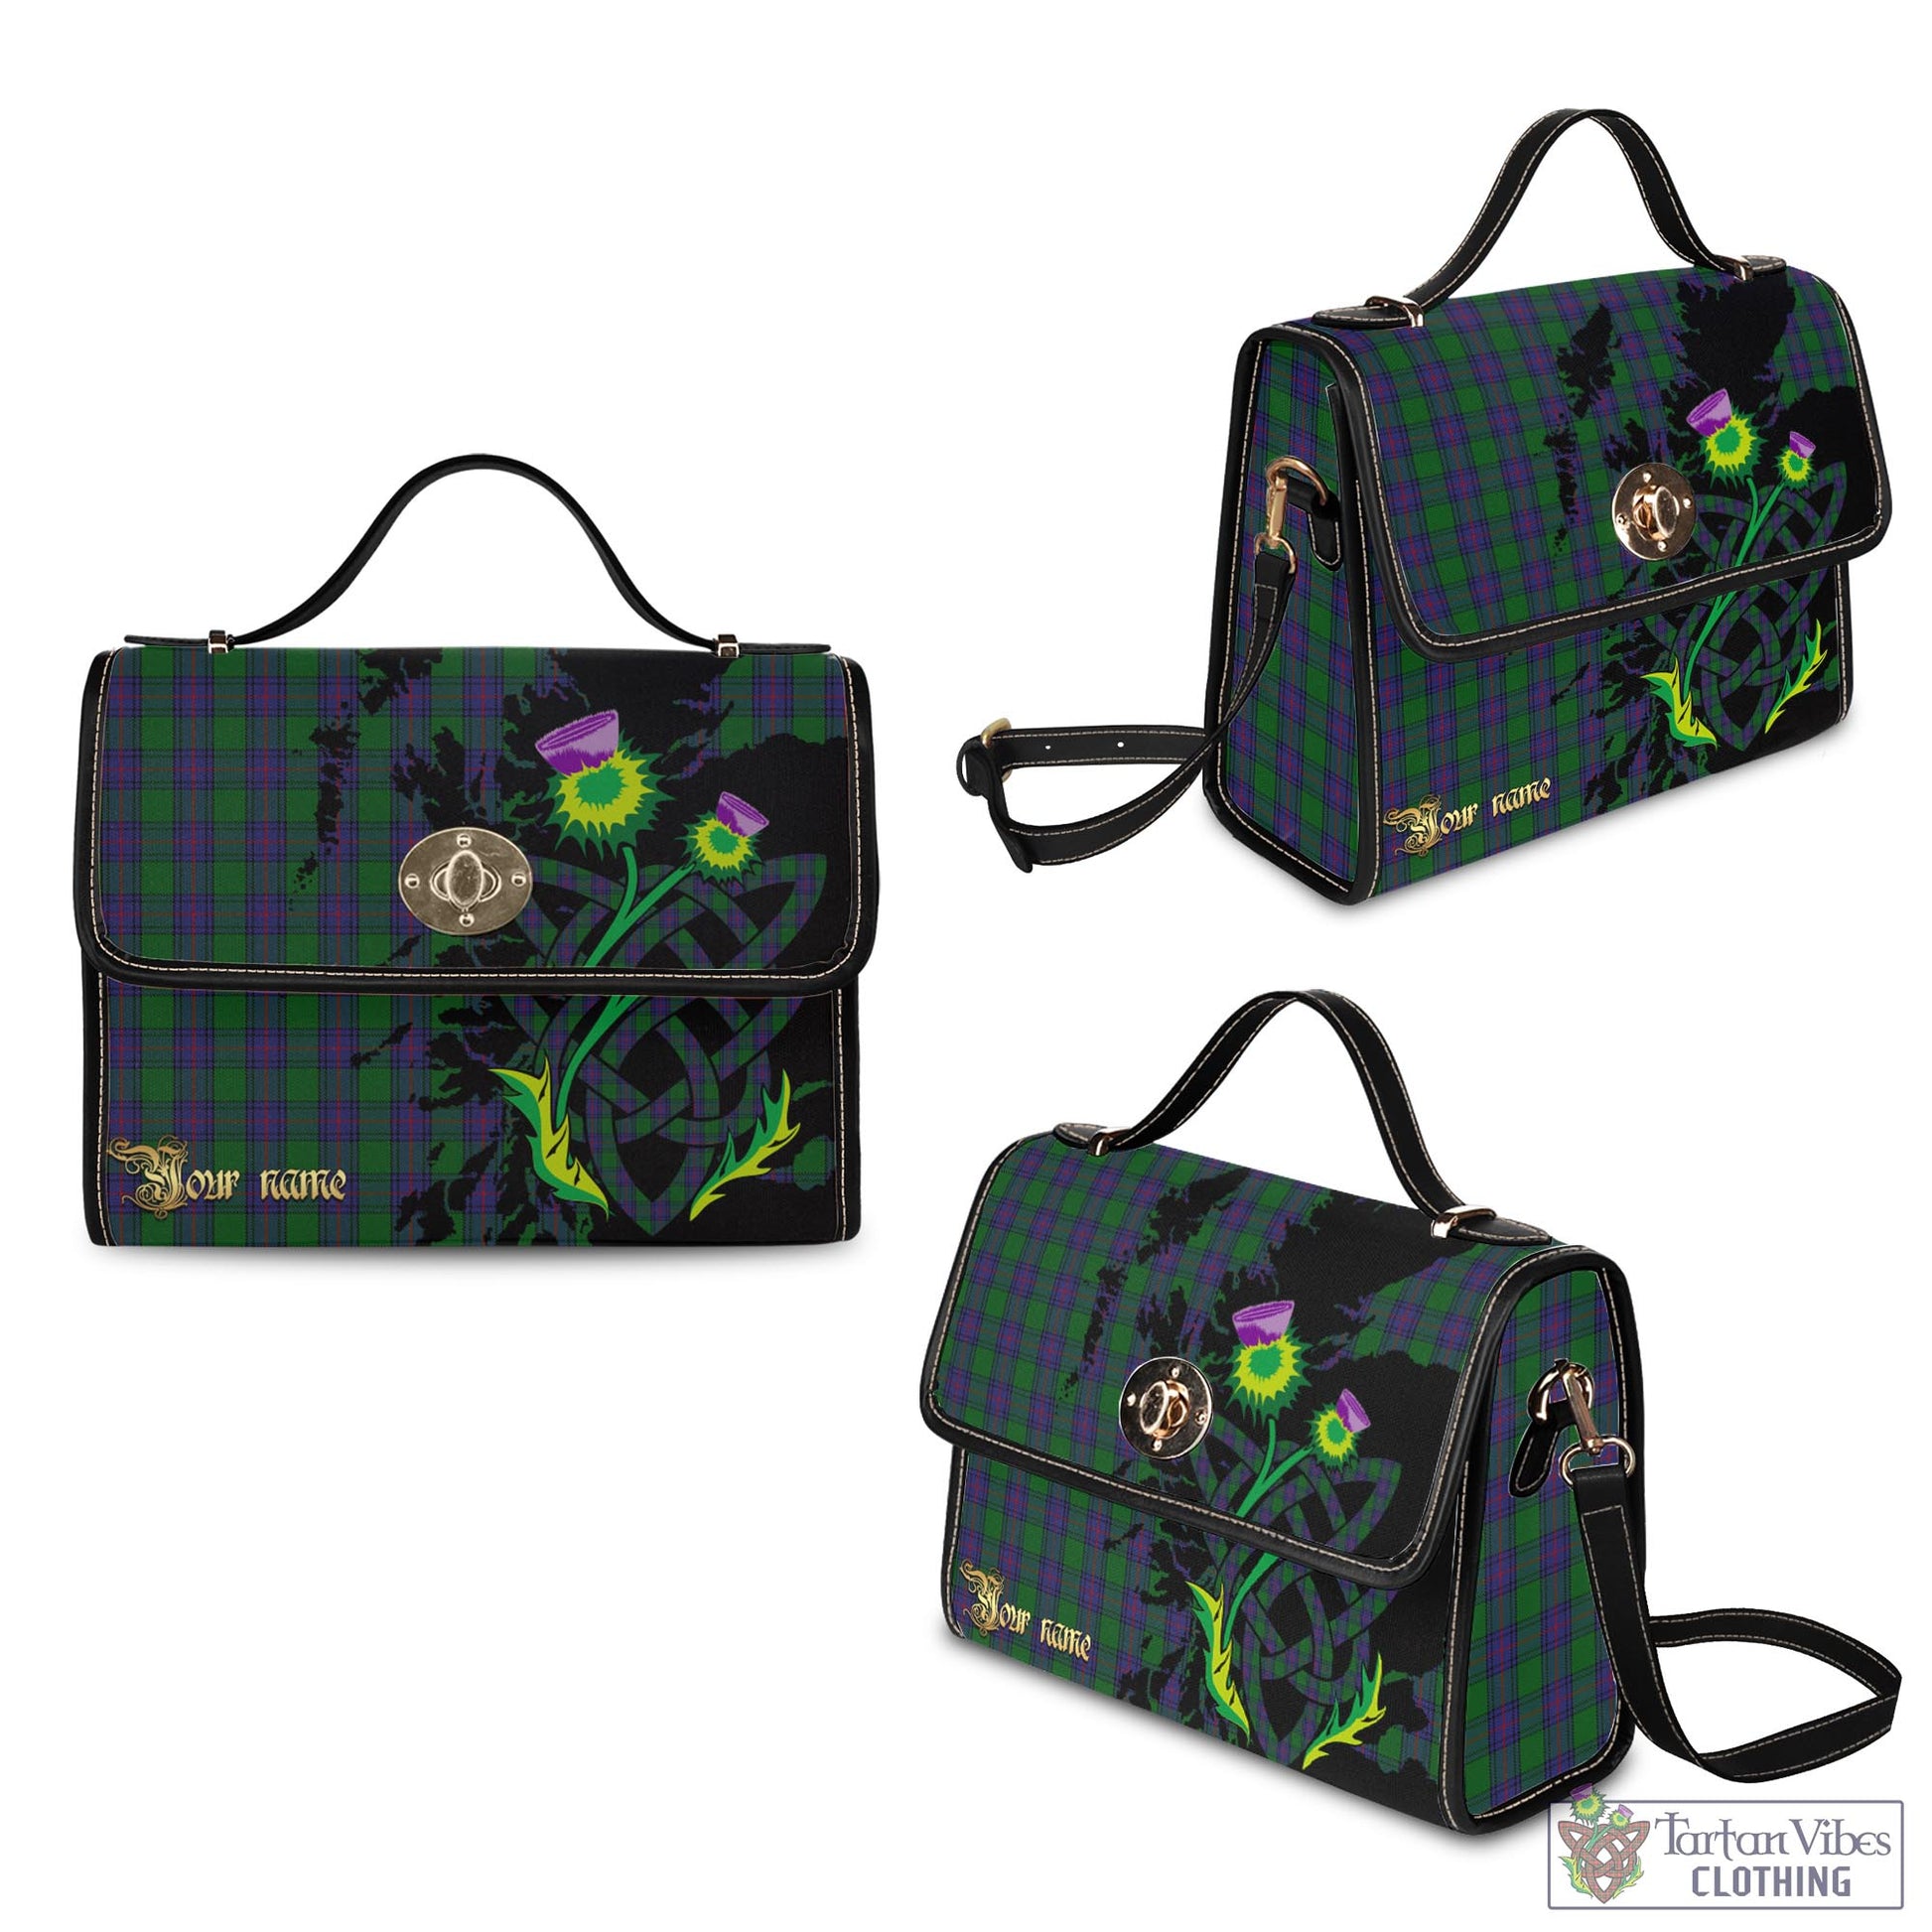 Tartan Vibes Clothing Shaw Tartan Waterproof Canvas Bag with Scotland Map and Thistle Celtic Accents